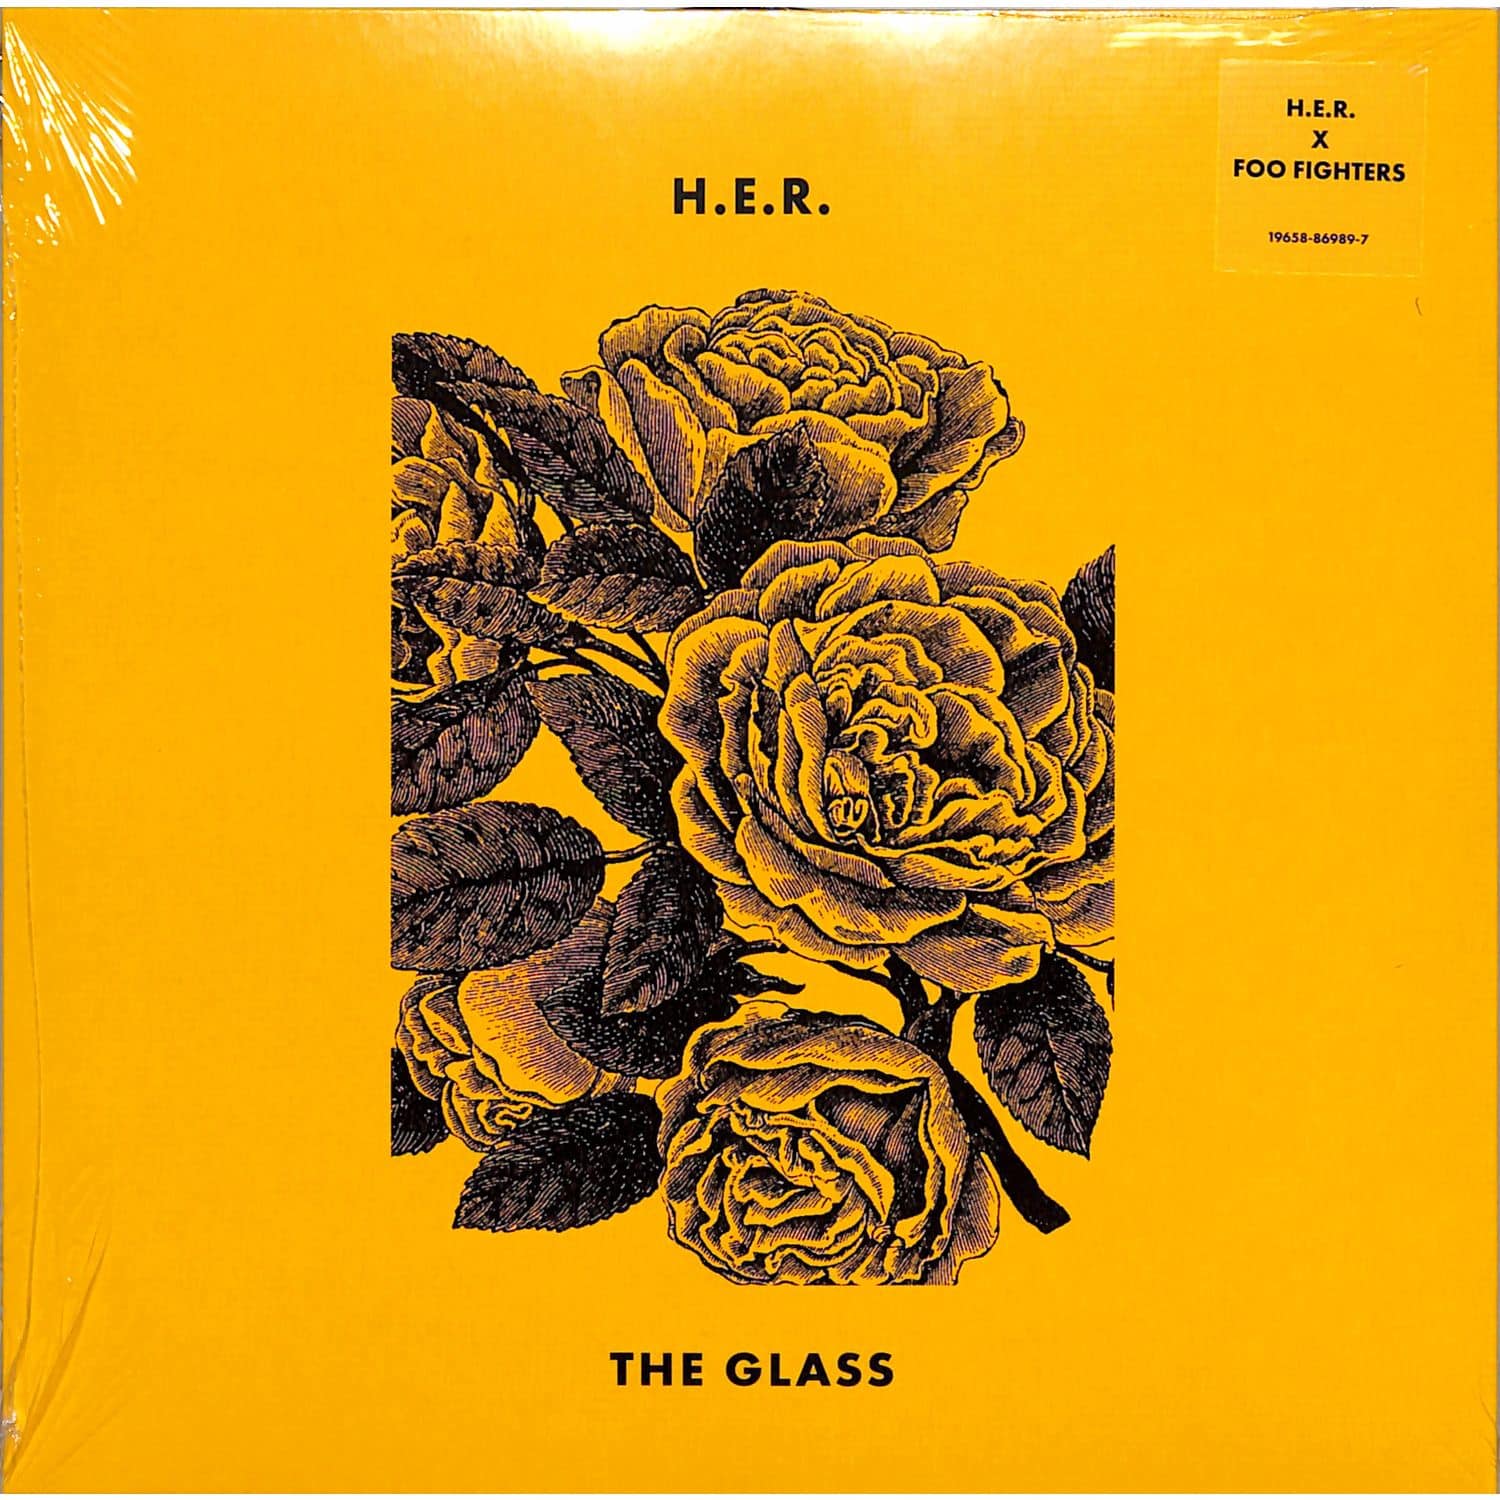 H.E.R. & Foo Fighters - THE GLASS 